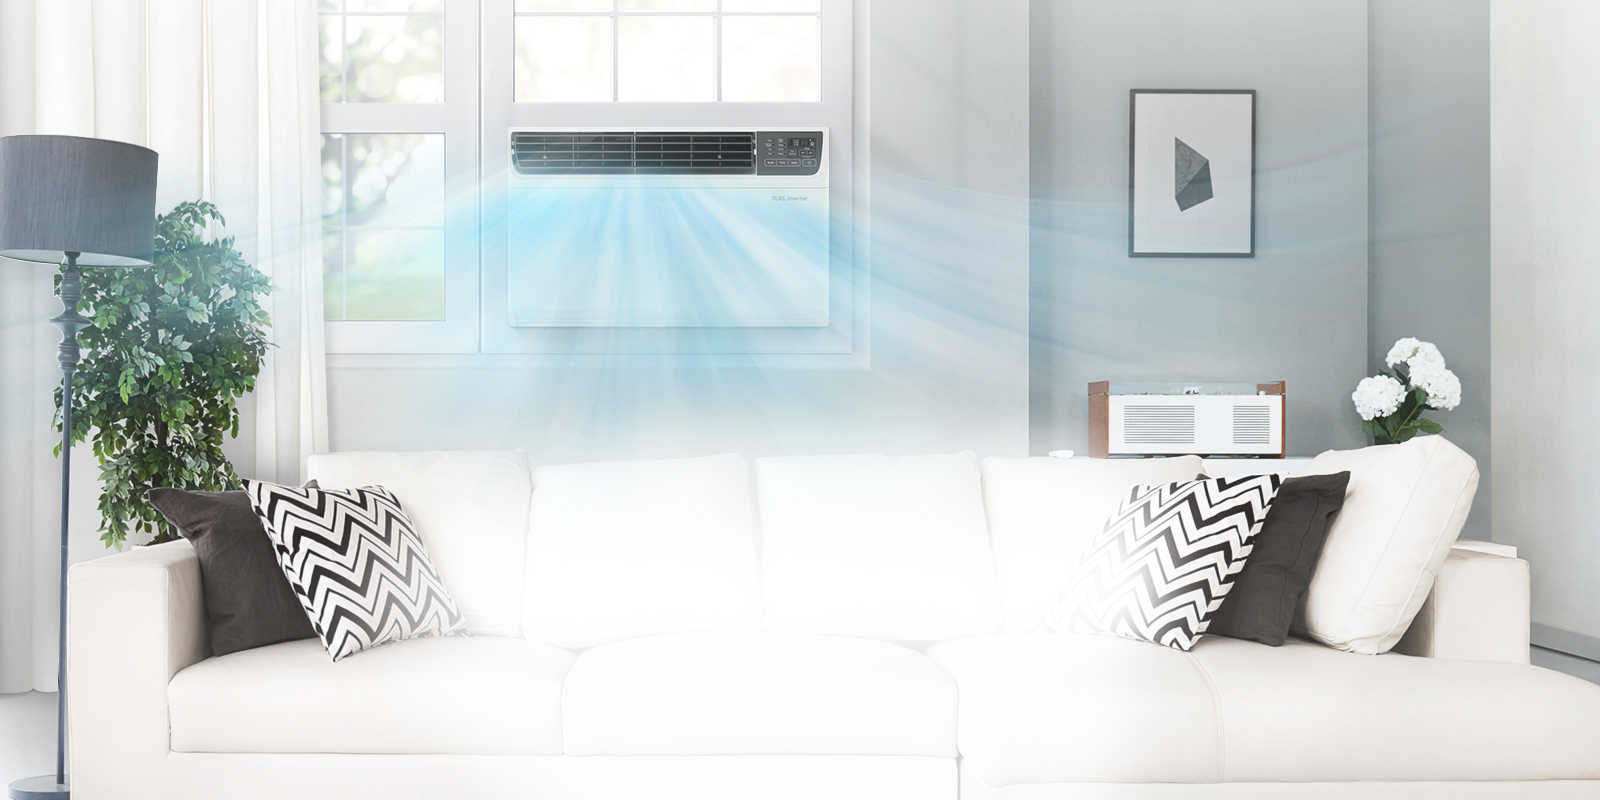 Samsung Authorized Air Conditioner Service near me